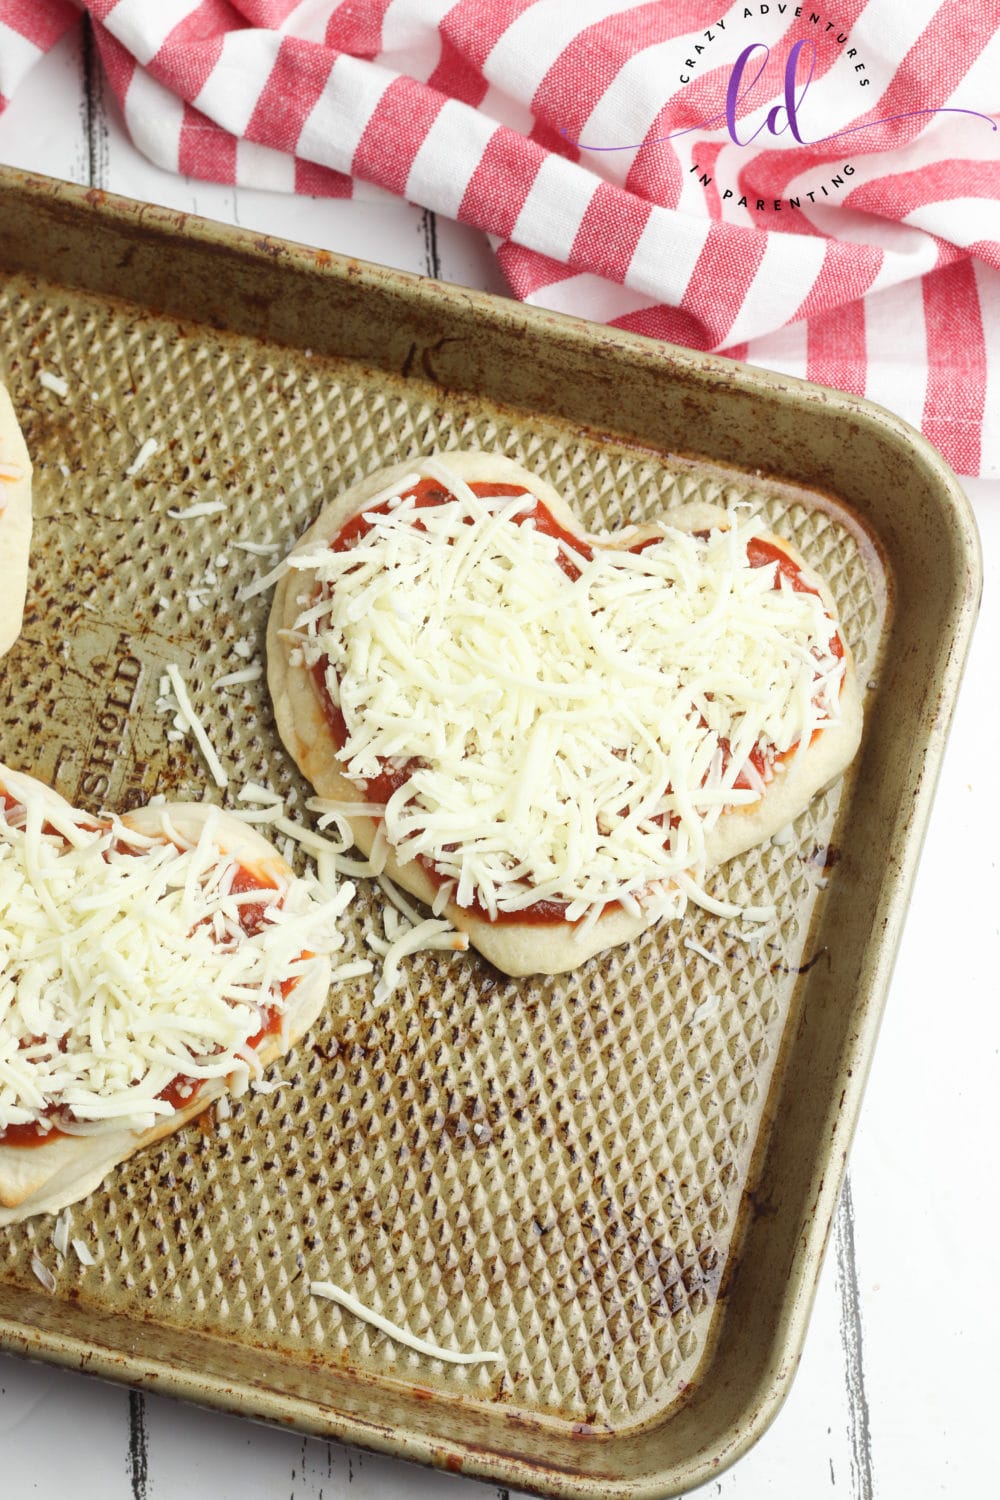 Add Shredded Mozzarella Cheese to Heart-Shaped Pizza for Valentine's Day